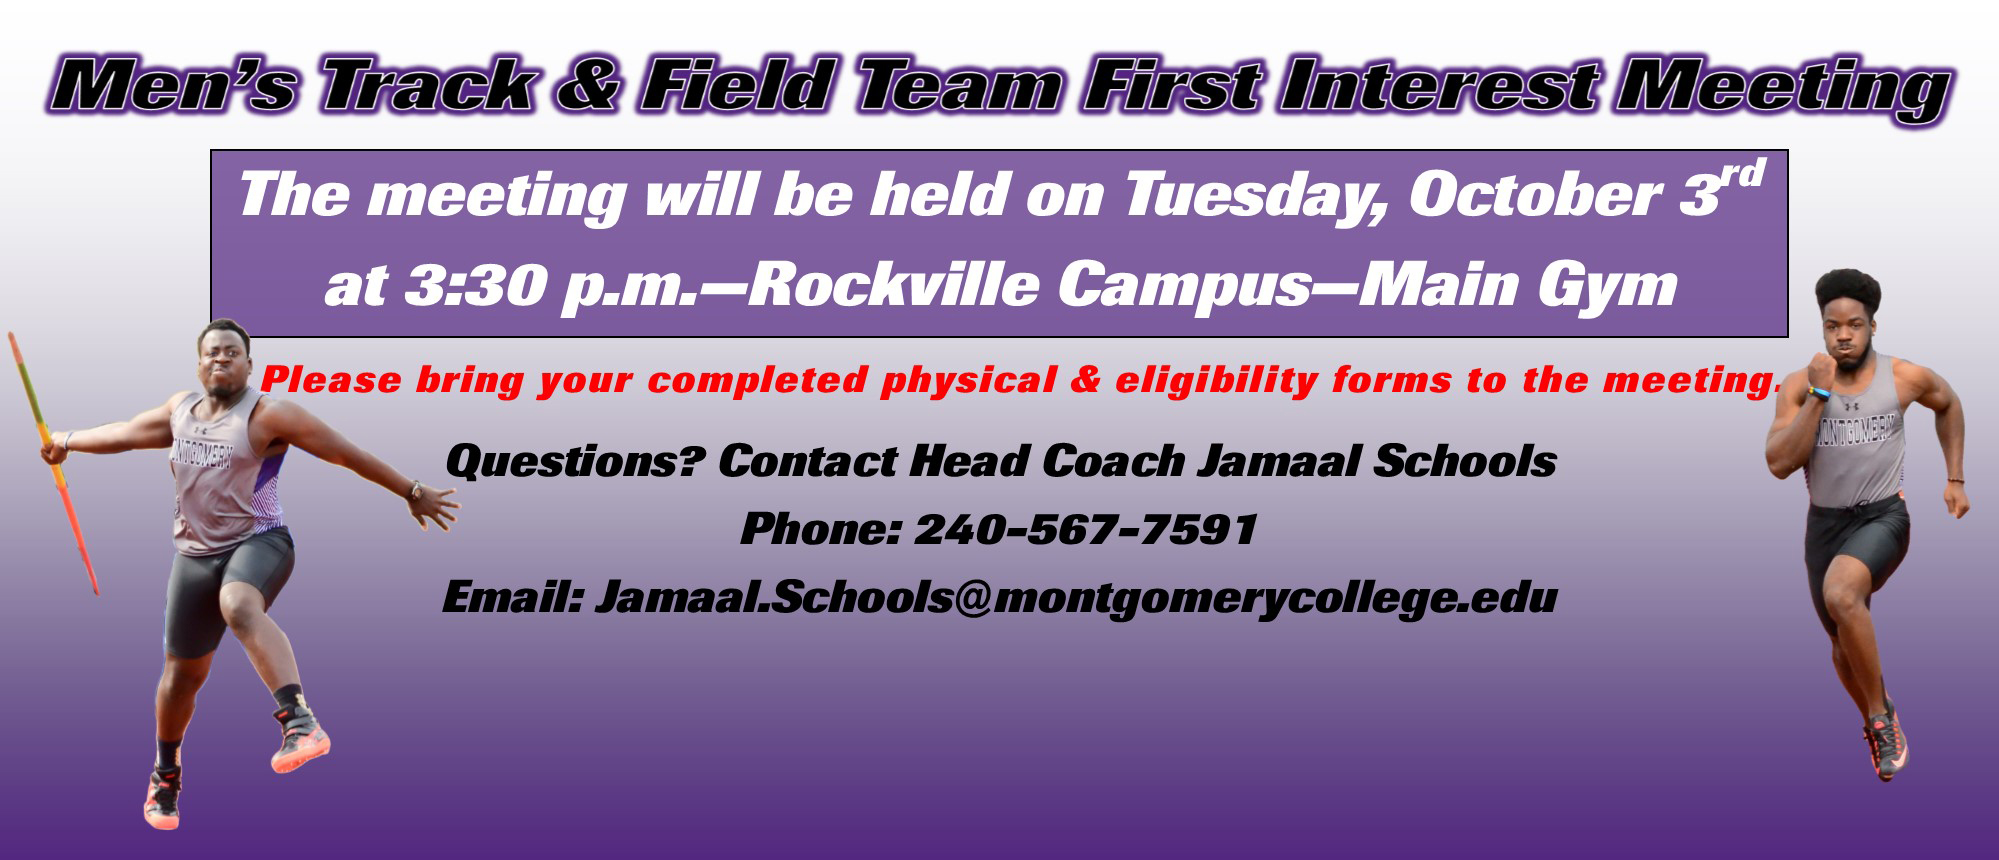 Men’s Track and Field Team Hosts Interest Meeting on Tuesday, October 3rd